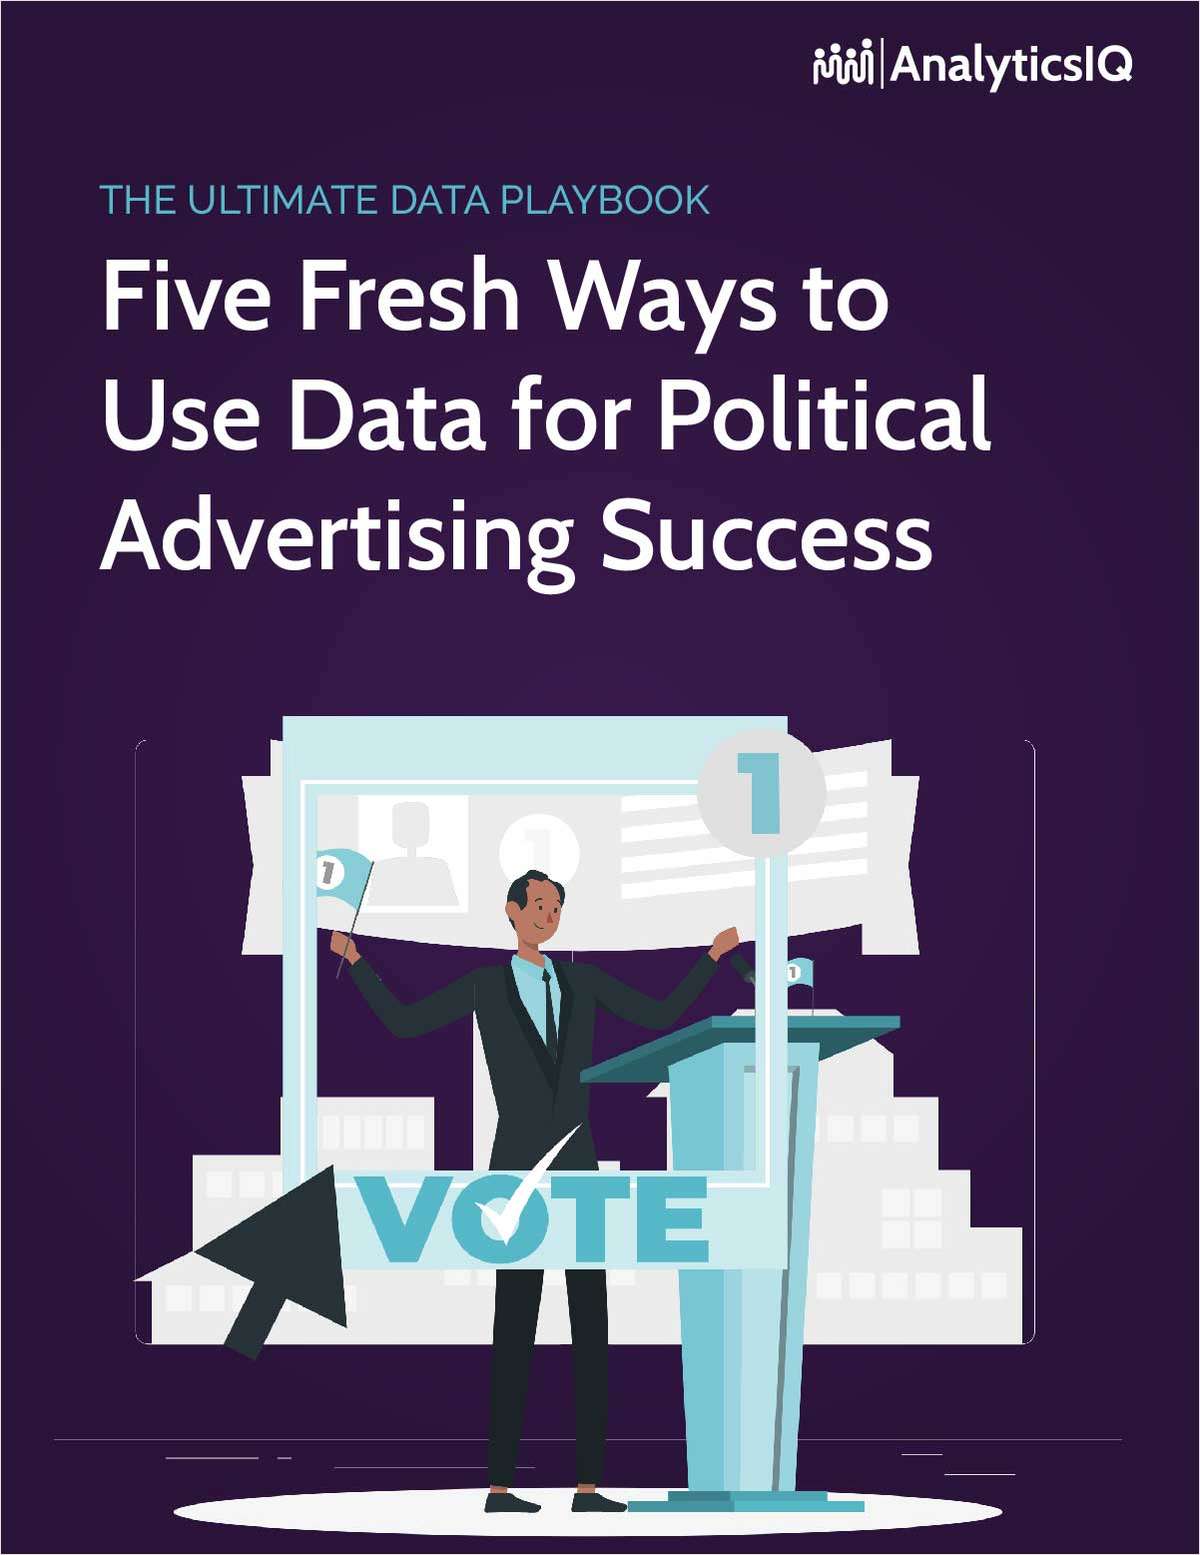 Five Fresh Ways to Use Data for Political Advertising Success